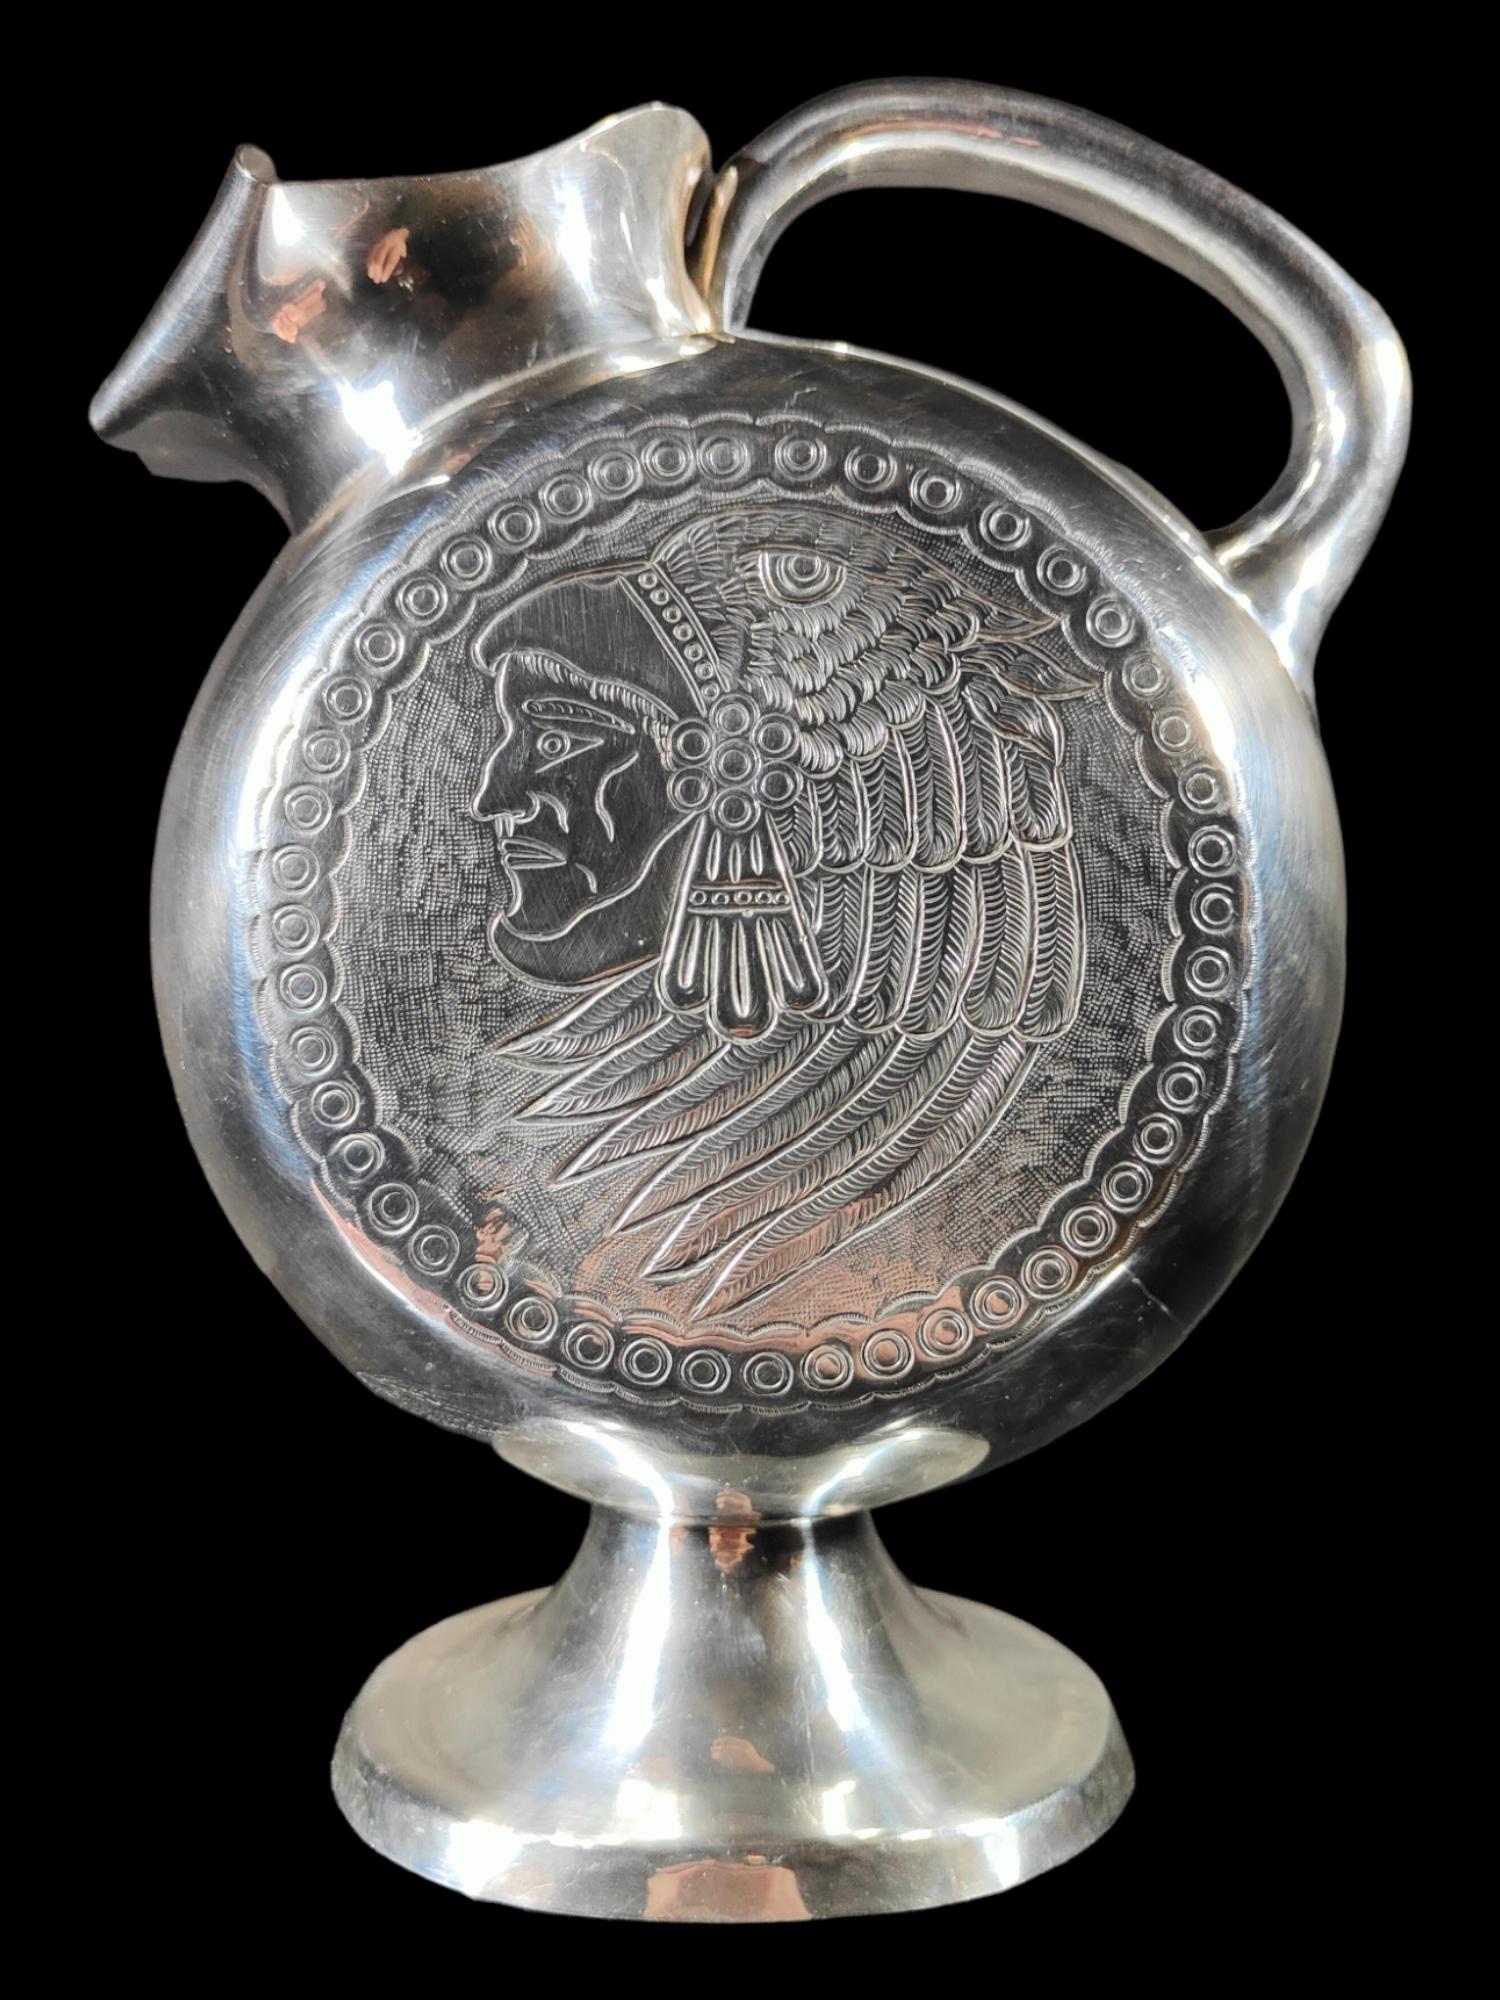 Large Mexican Pot Sterling Silver Years 50 In Pot
ELEGANT MARKED POT, MADE IN MEXICO IN THE 1950S. THE PURITY OF THE SILVER IS 925. BEAUTIFUL CARVED WORK WITH AZTEC PATTERNS ON BOTH SIDES-MEASURES: 30X14X22 CM AND WEIGHT 1377 GRAM